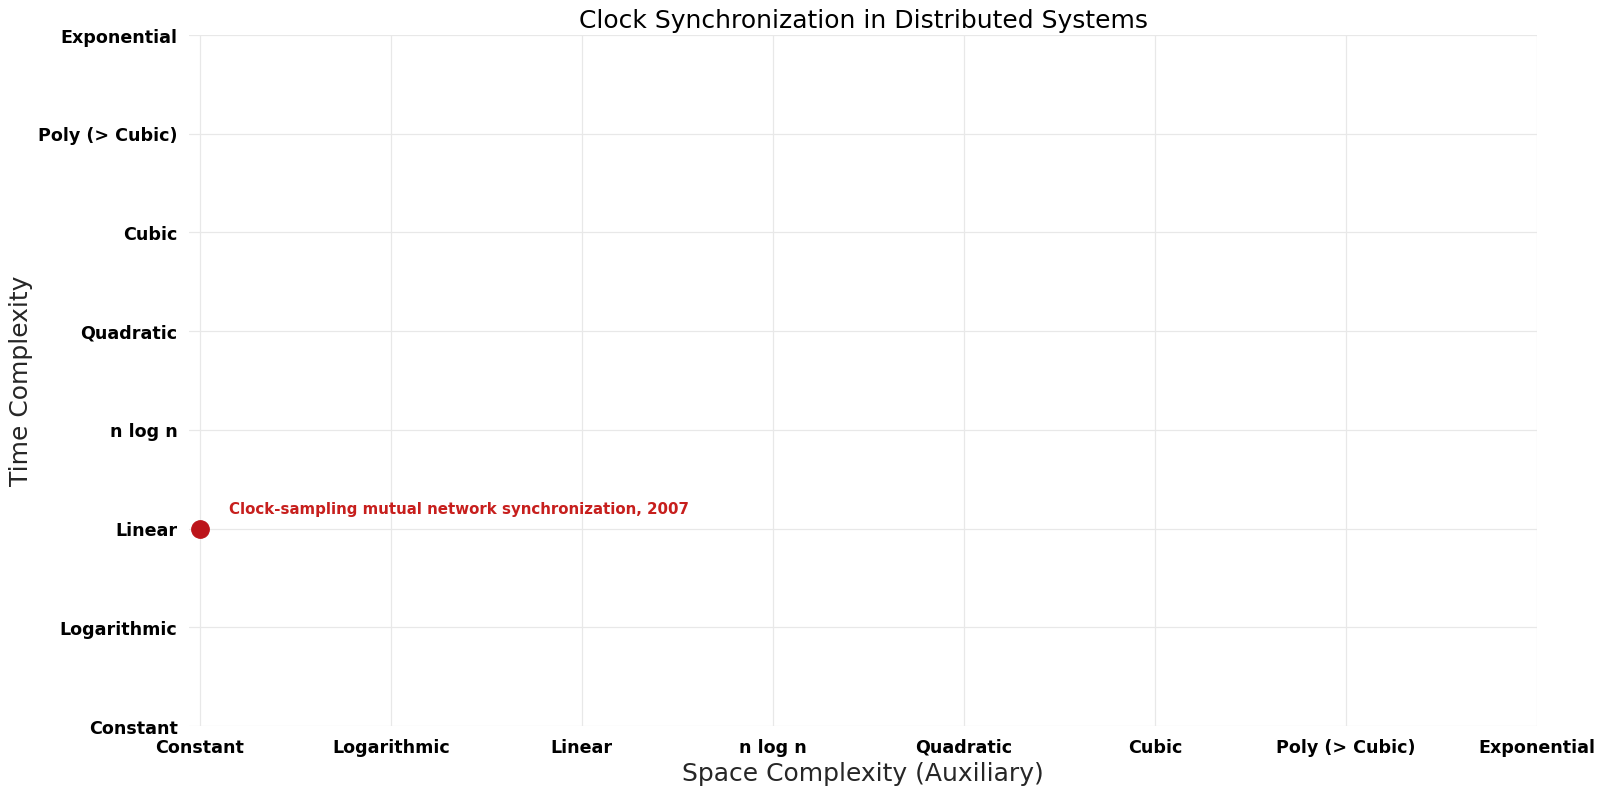 Clock Synchronization in Distributed Systems - Pareto Frontier.png